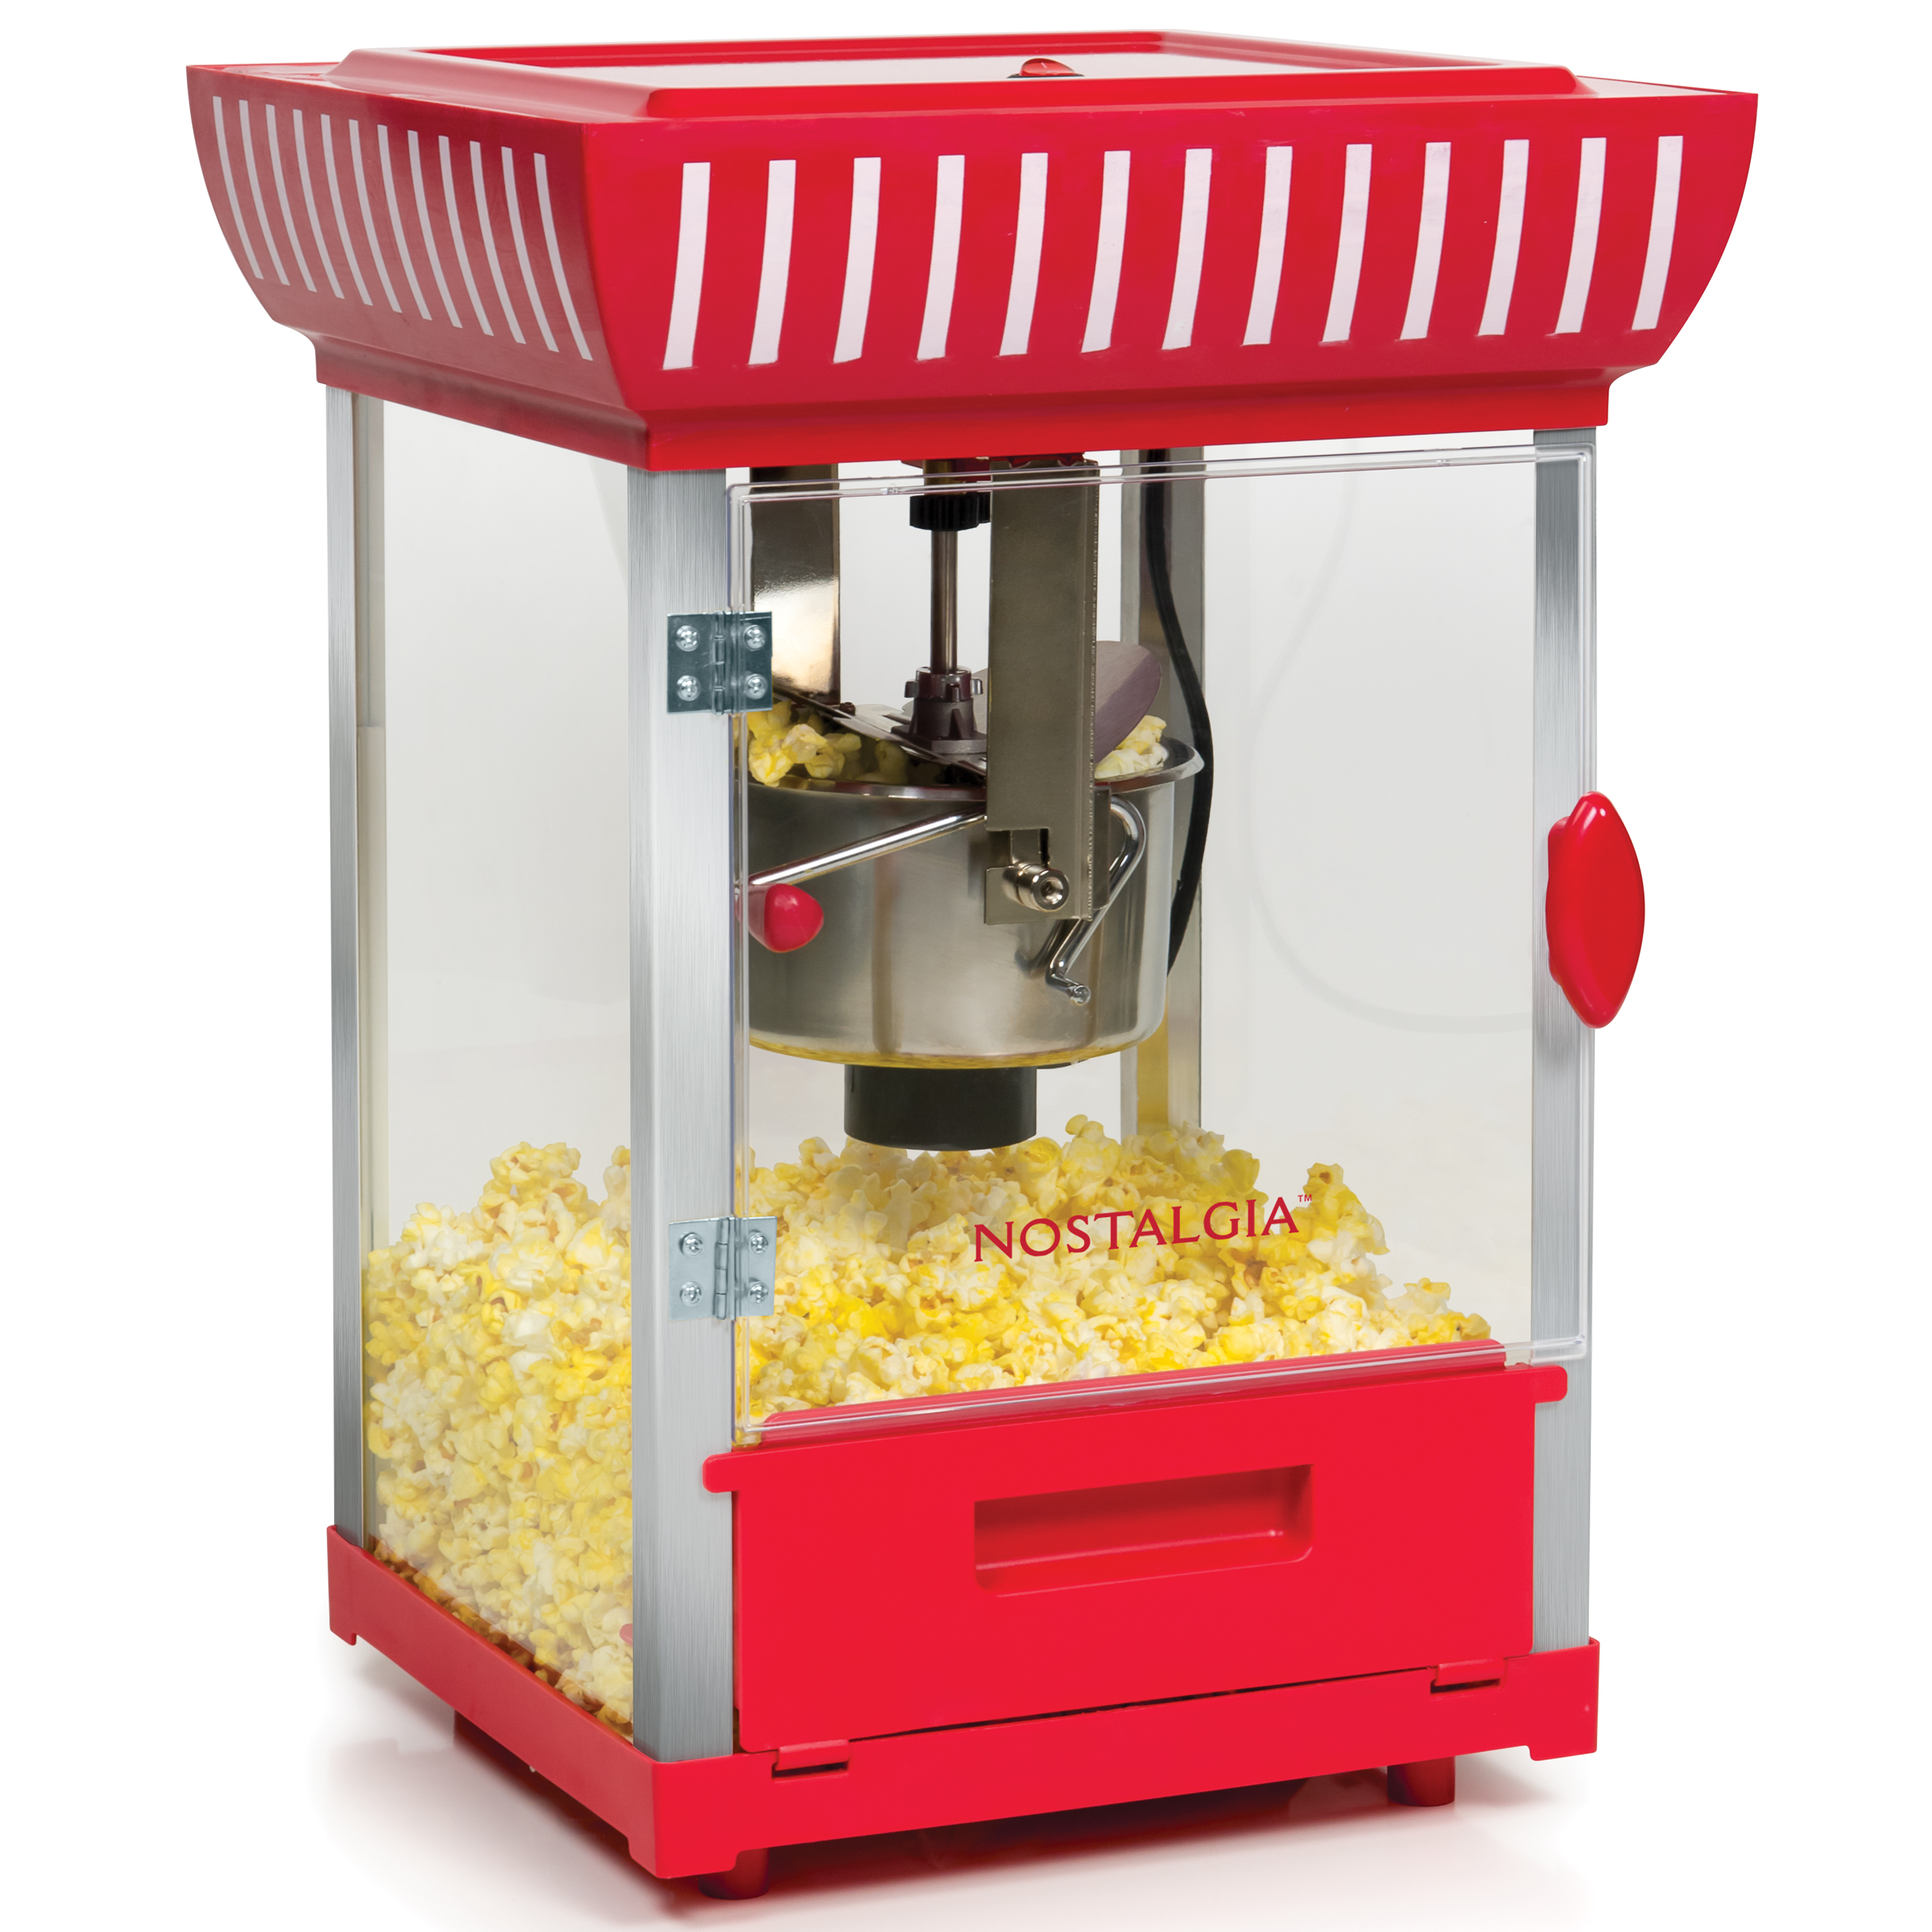 Nostalgia 2.5 oz Popcorn Cart, Makes 10 Cups, 48 in Tall, Red, White, CCP399 - image 5 of 6